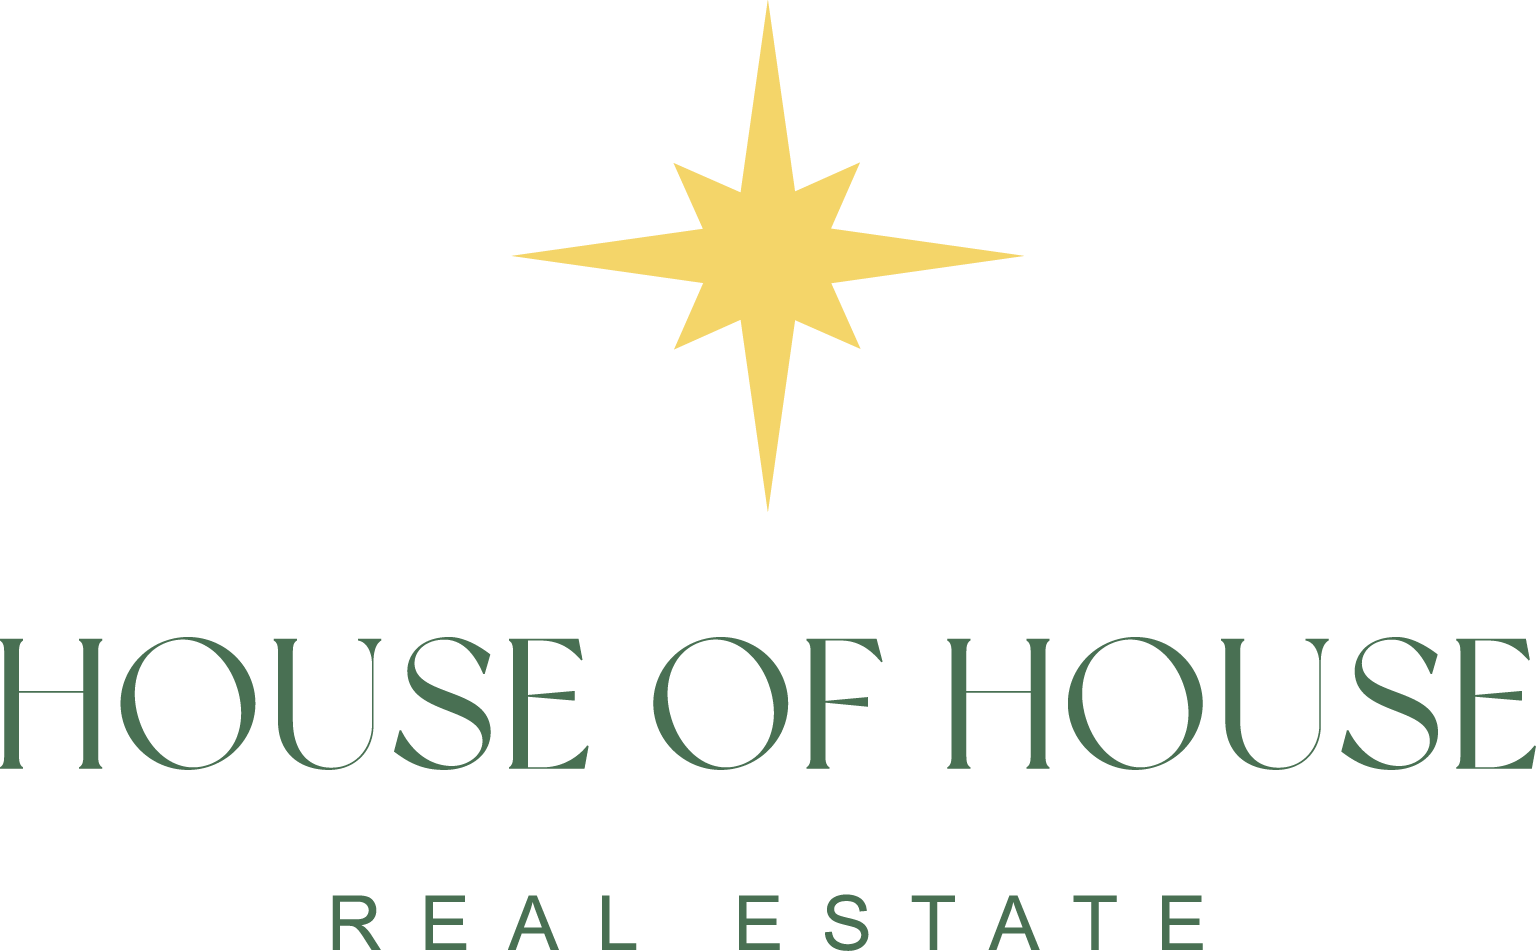 House of House Real Estate